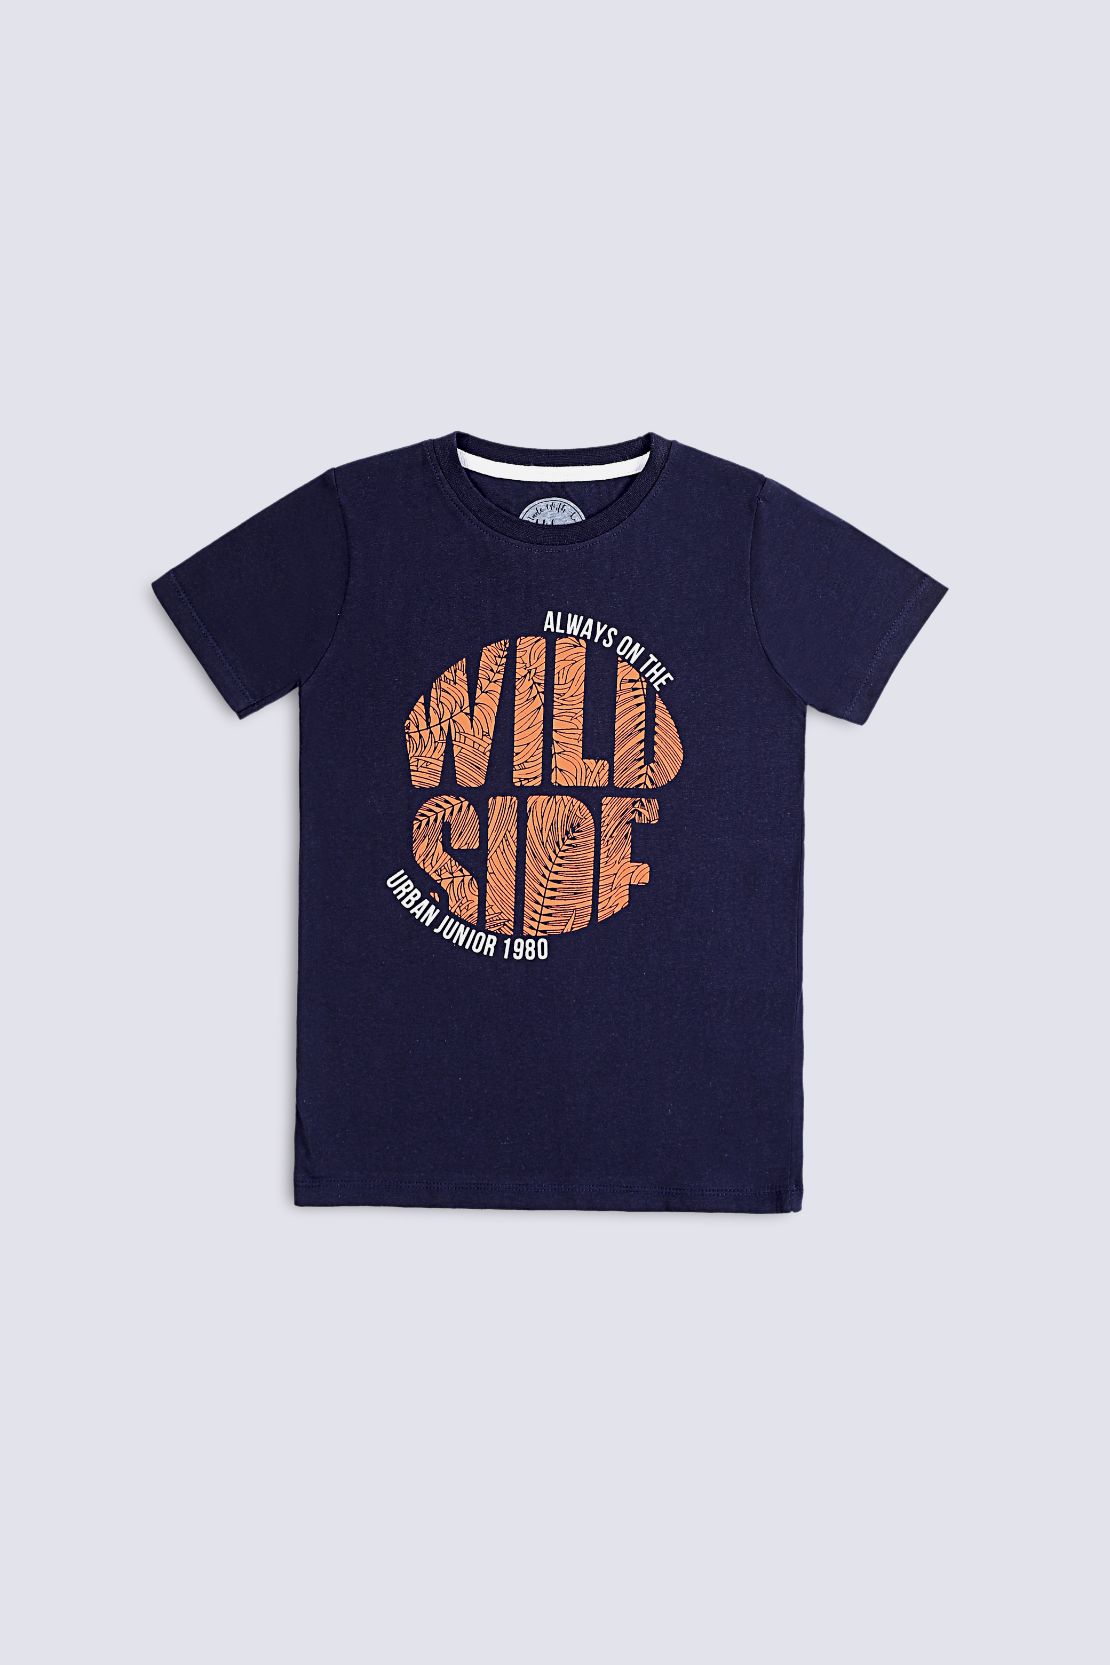 Wild Side Graphic Tee